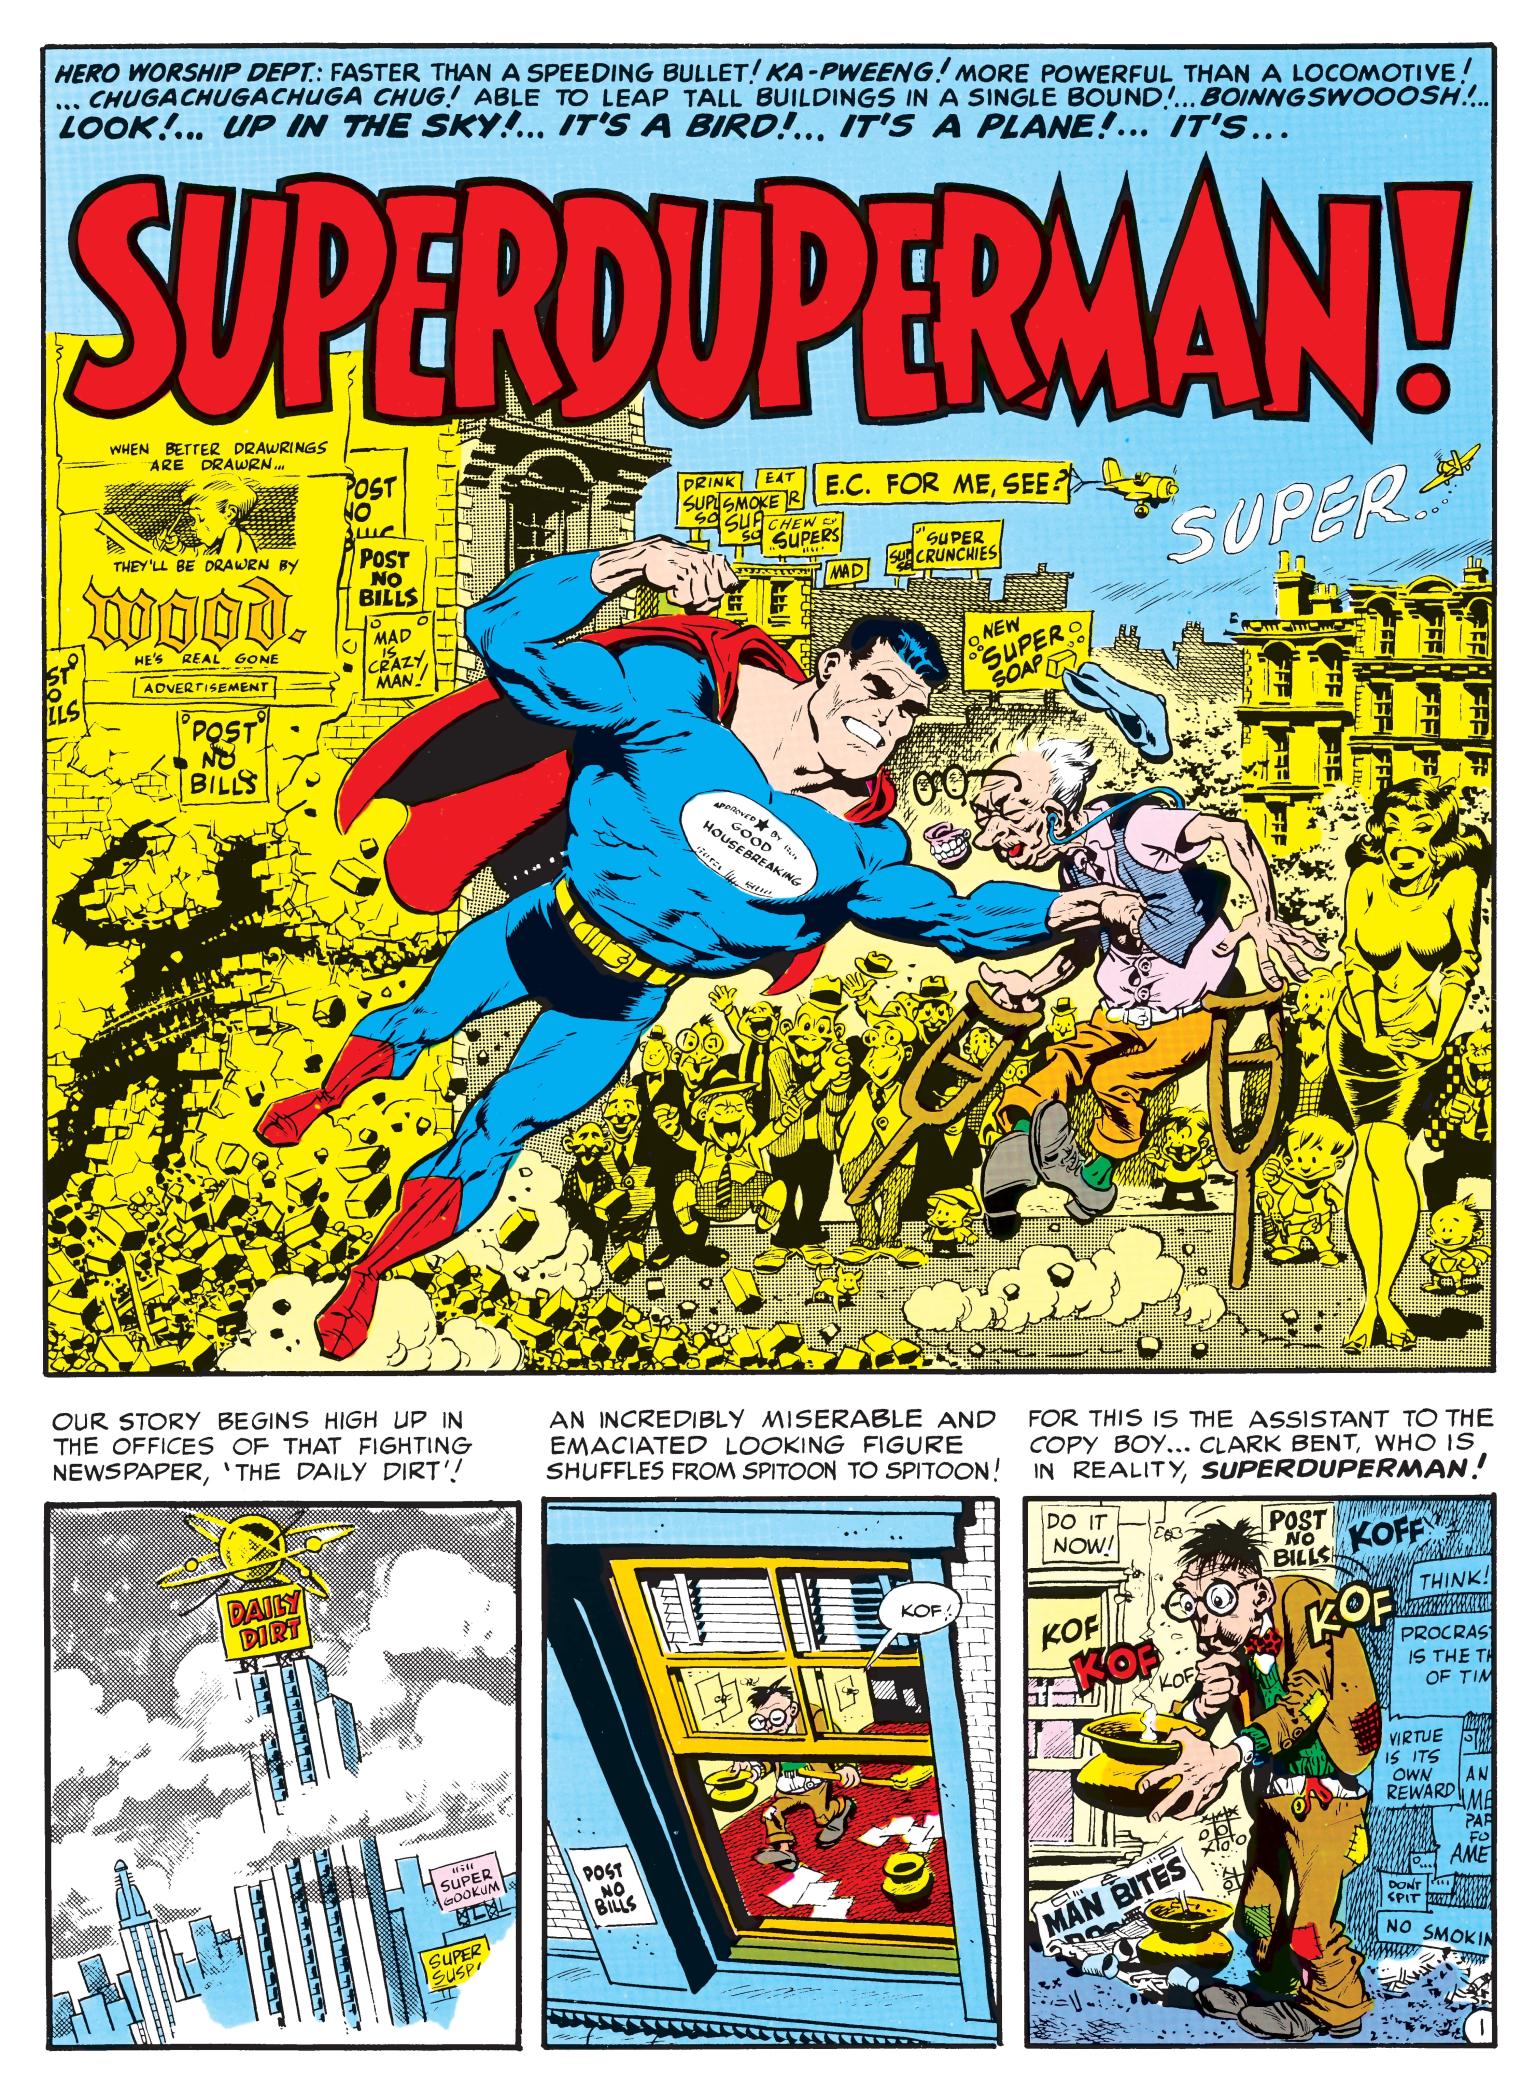 Comic book cover with the title "Superduperman" and a Superman-like figure in a cape who is attacking an elderly disabled man, surrounded by a crowd and a cityscape, with English text and three comic panels underneath, of the exterior of a skyscraper in the first panel, exterior of a window in the second panel, and interior of an office in the third panel.